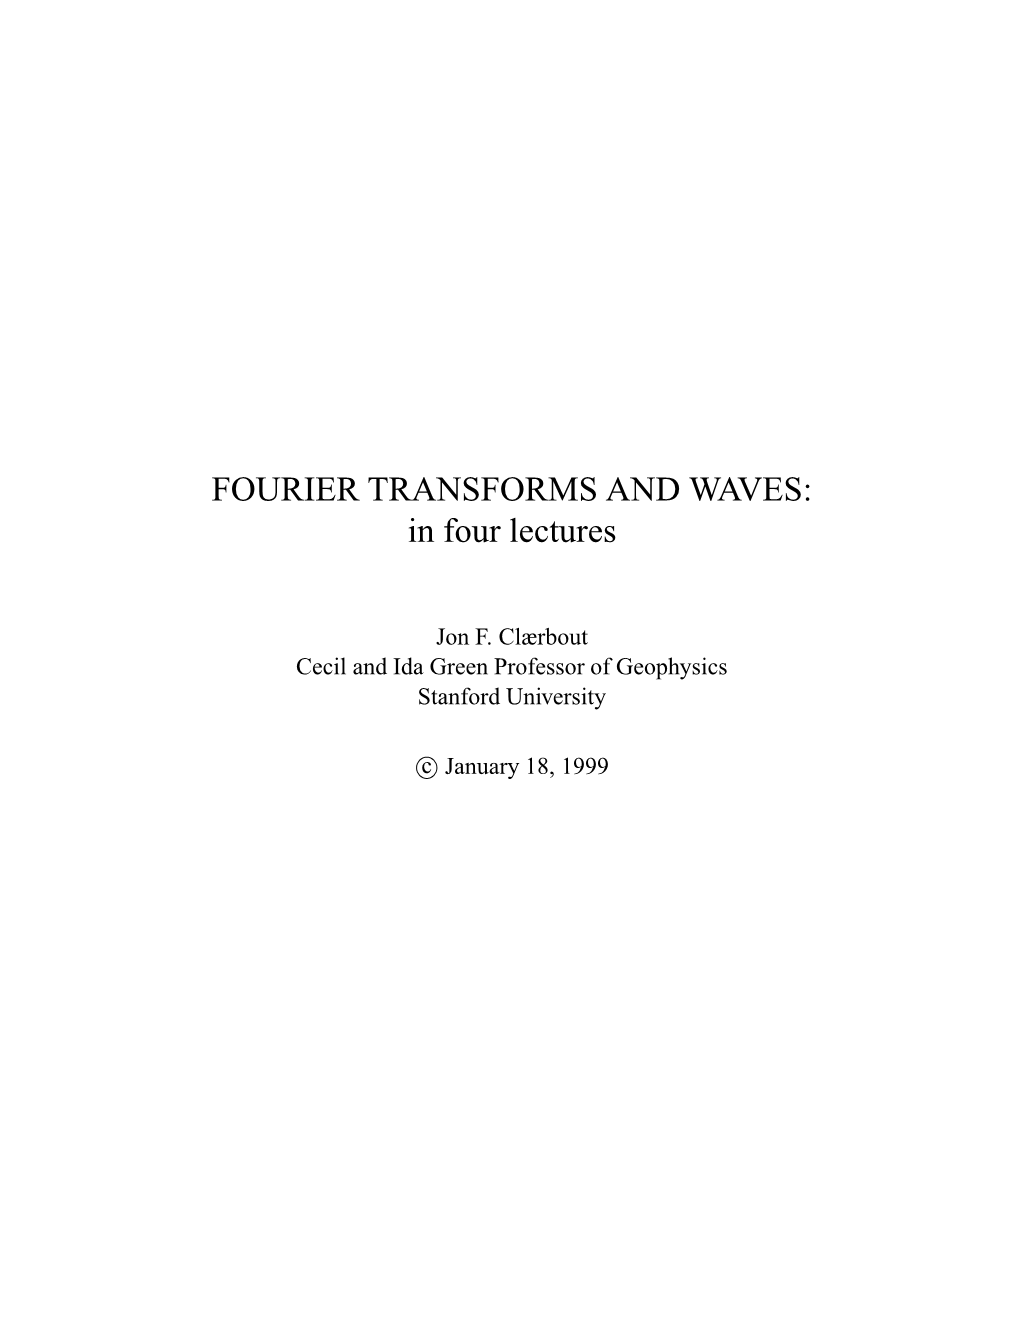 FOURIER TRANSFORMS and WAVES: in Four Lectures